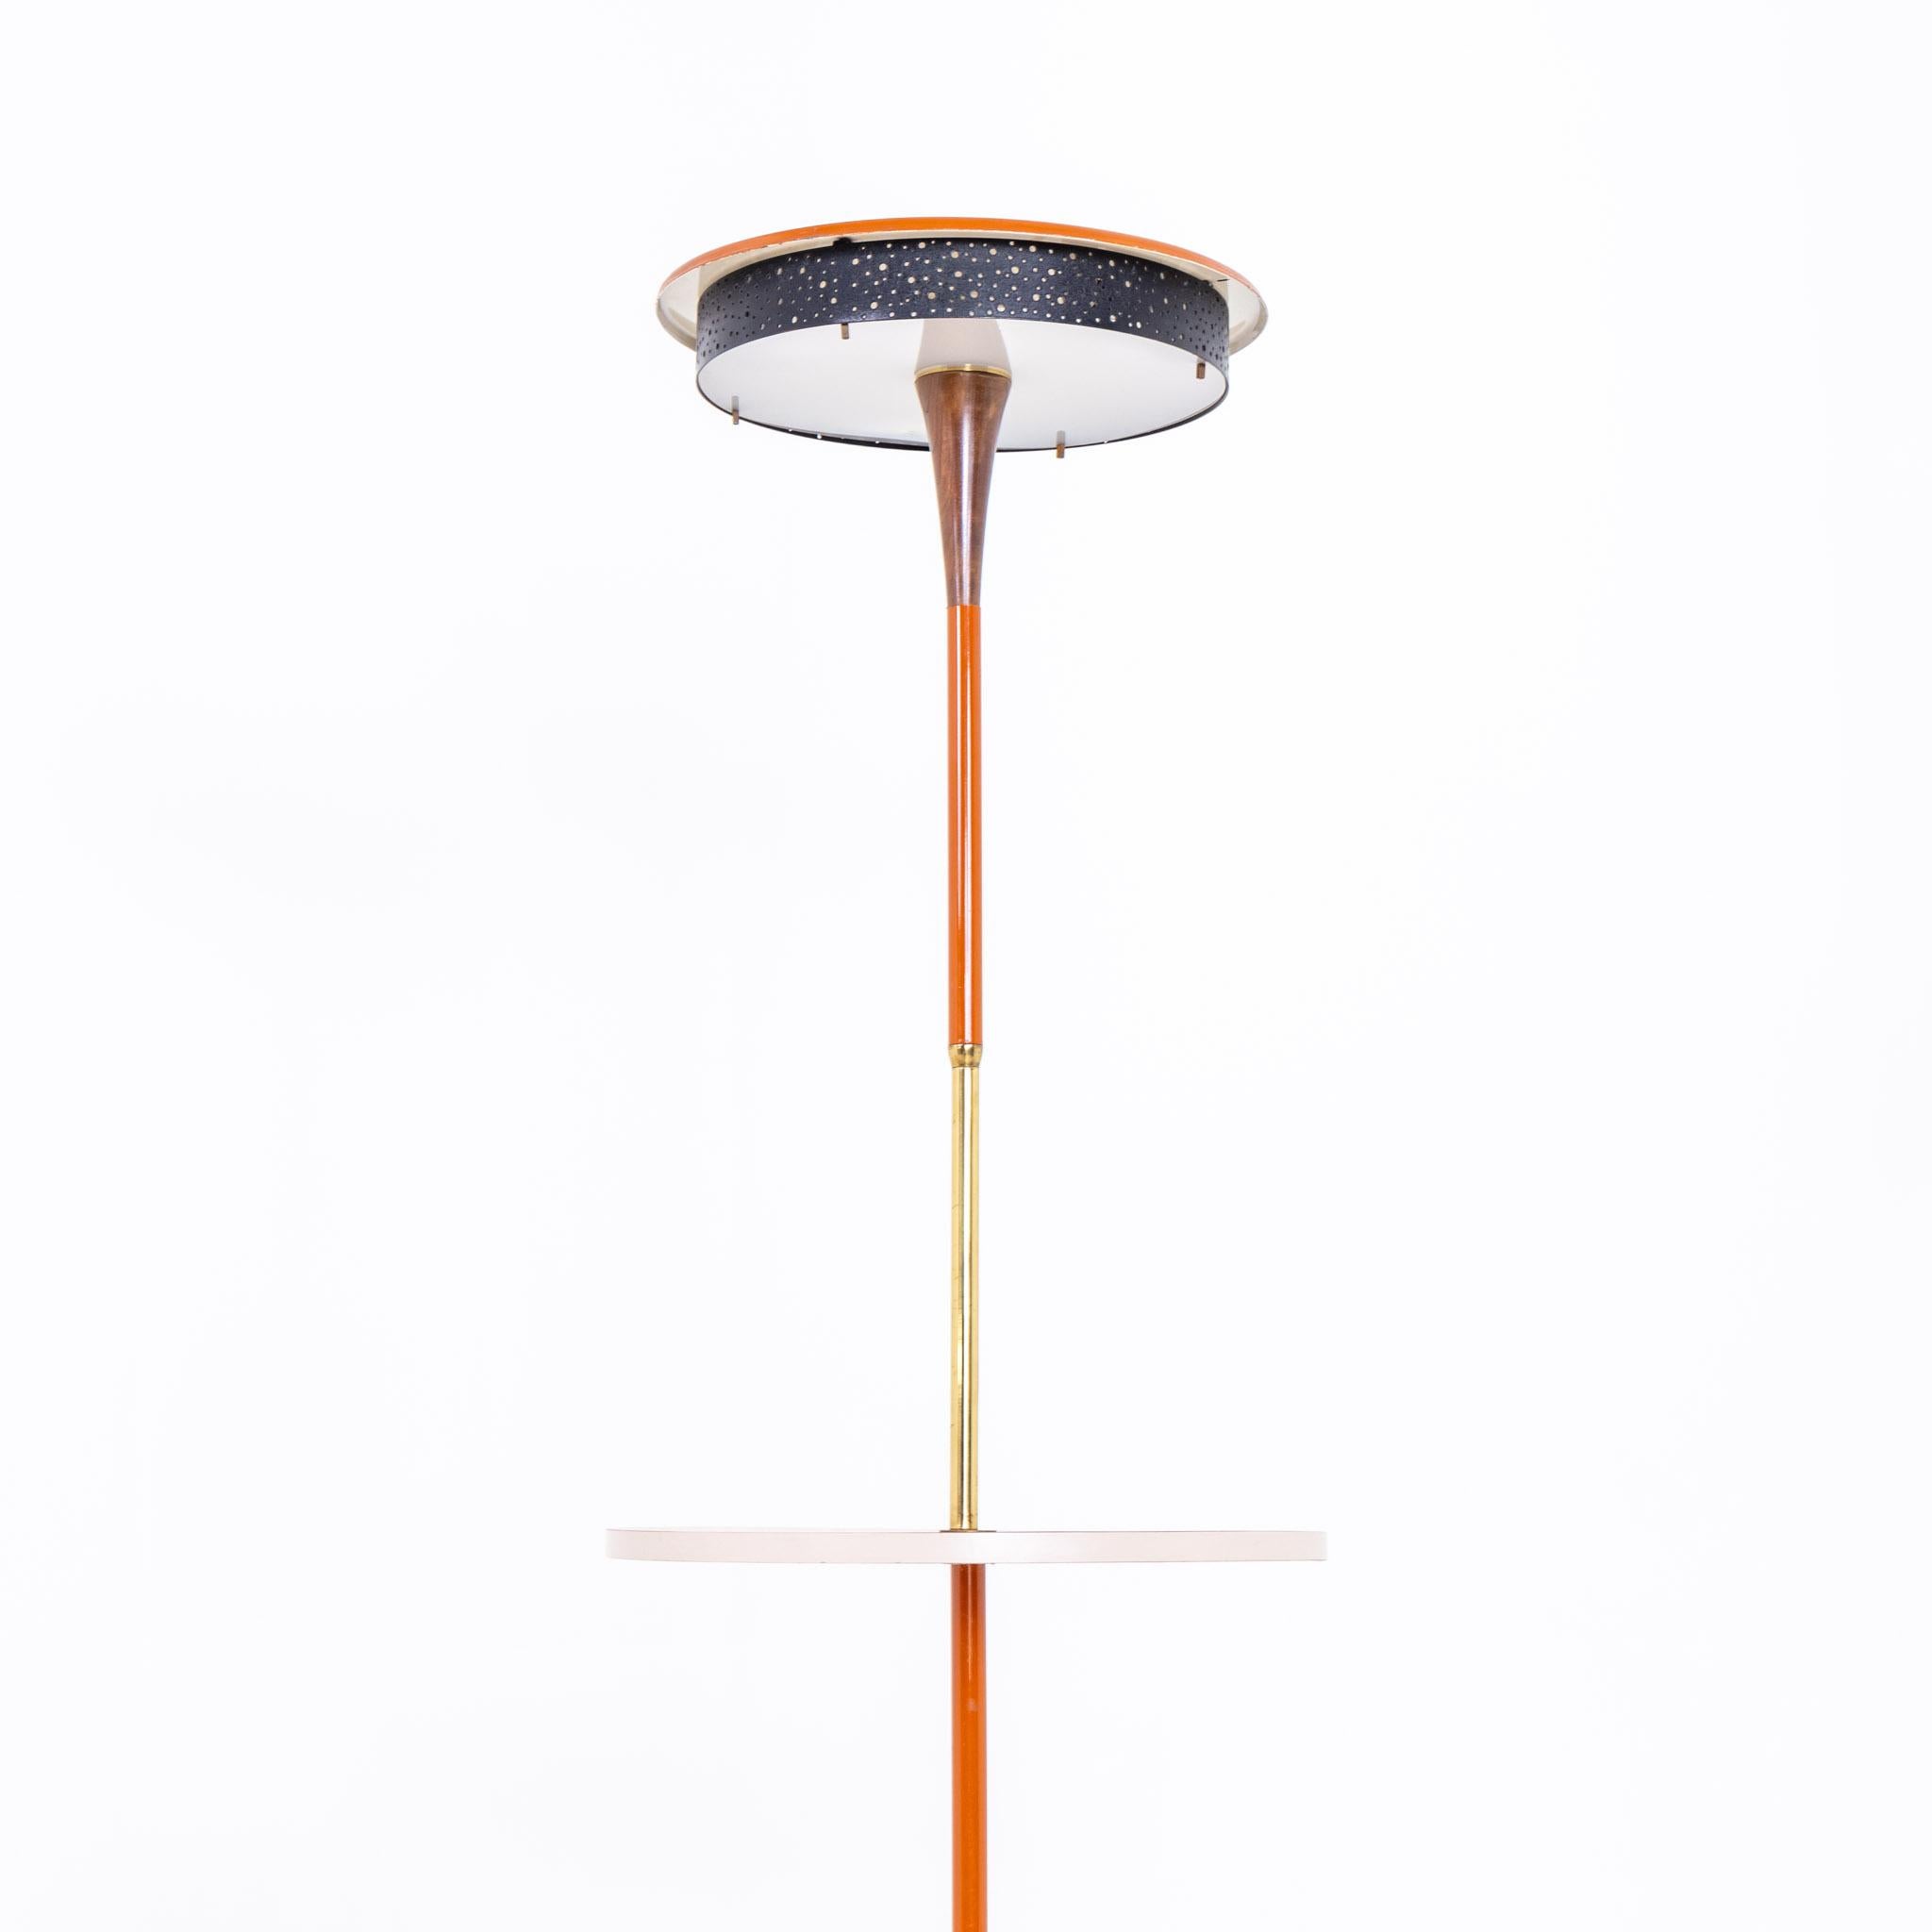 Floor lamp on disc base with central shelf and round lampshade. Wood, brass and metal, partially painted red.